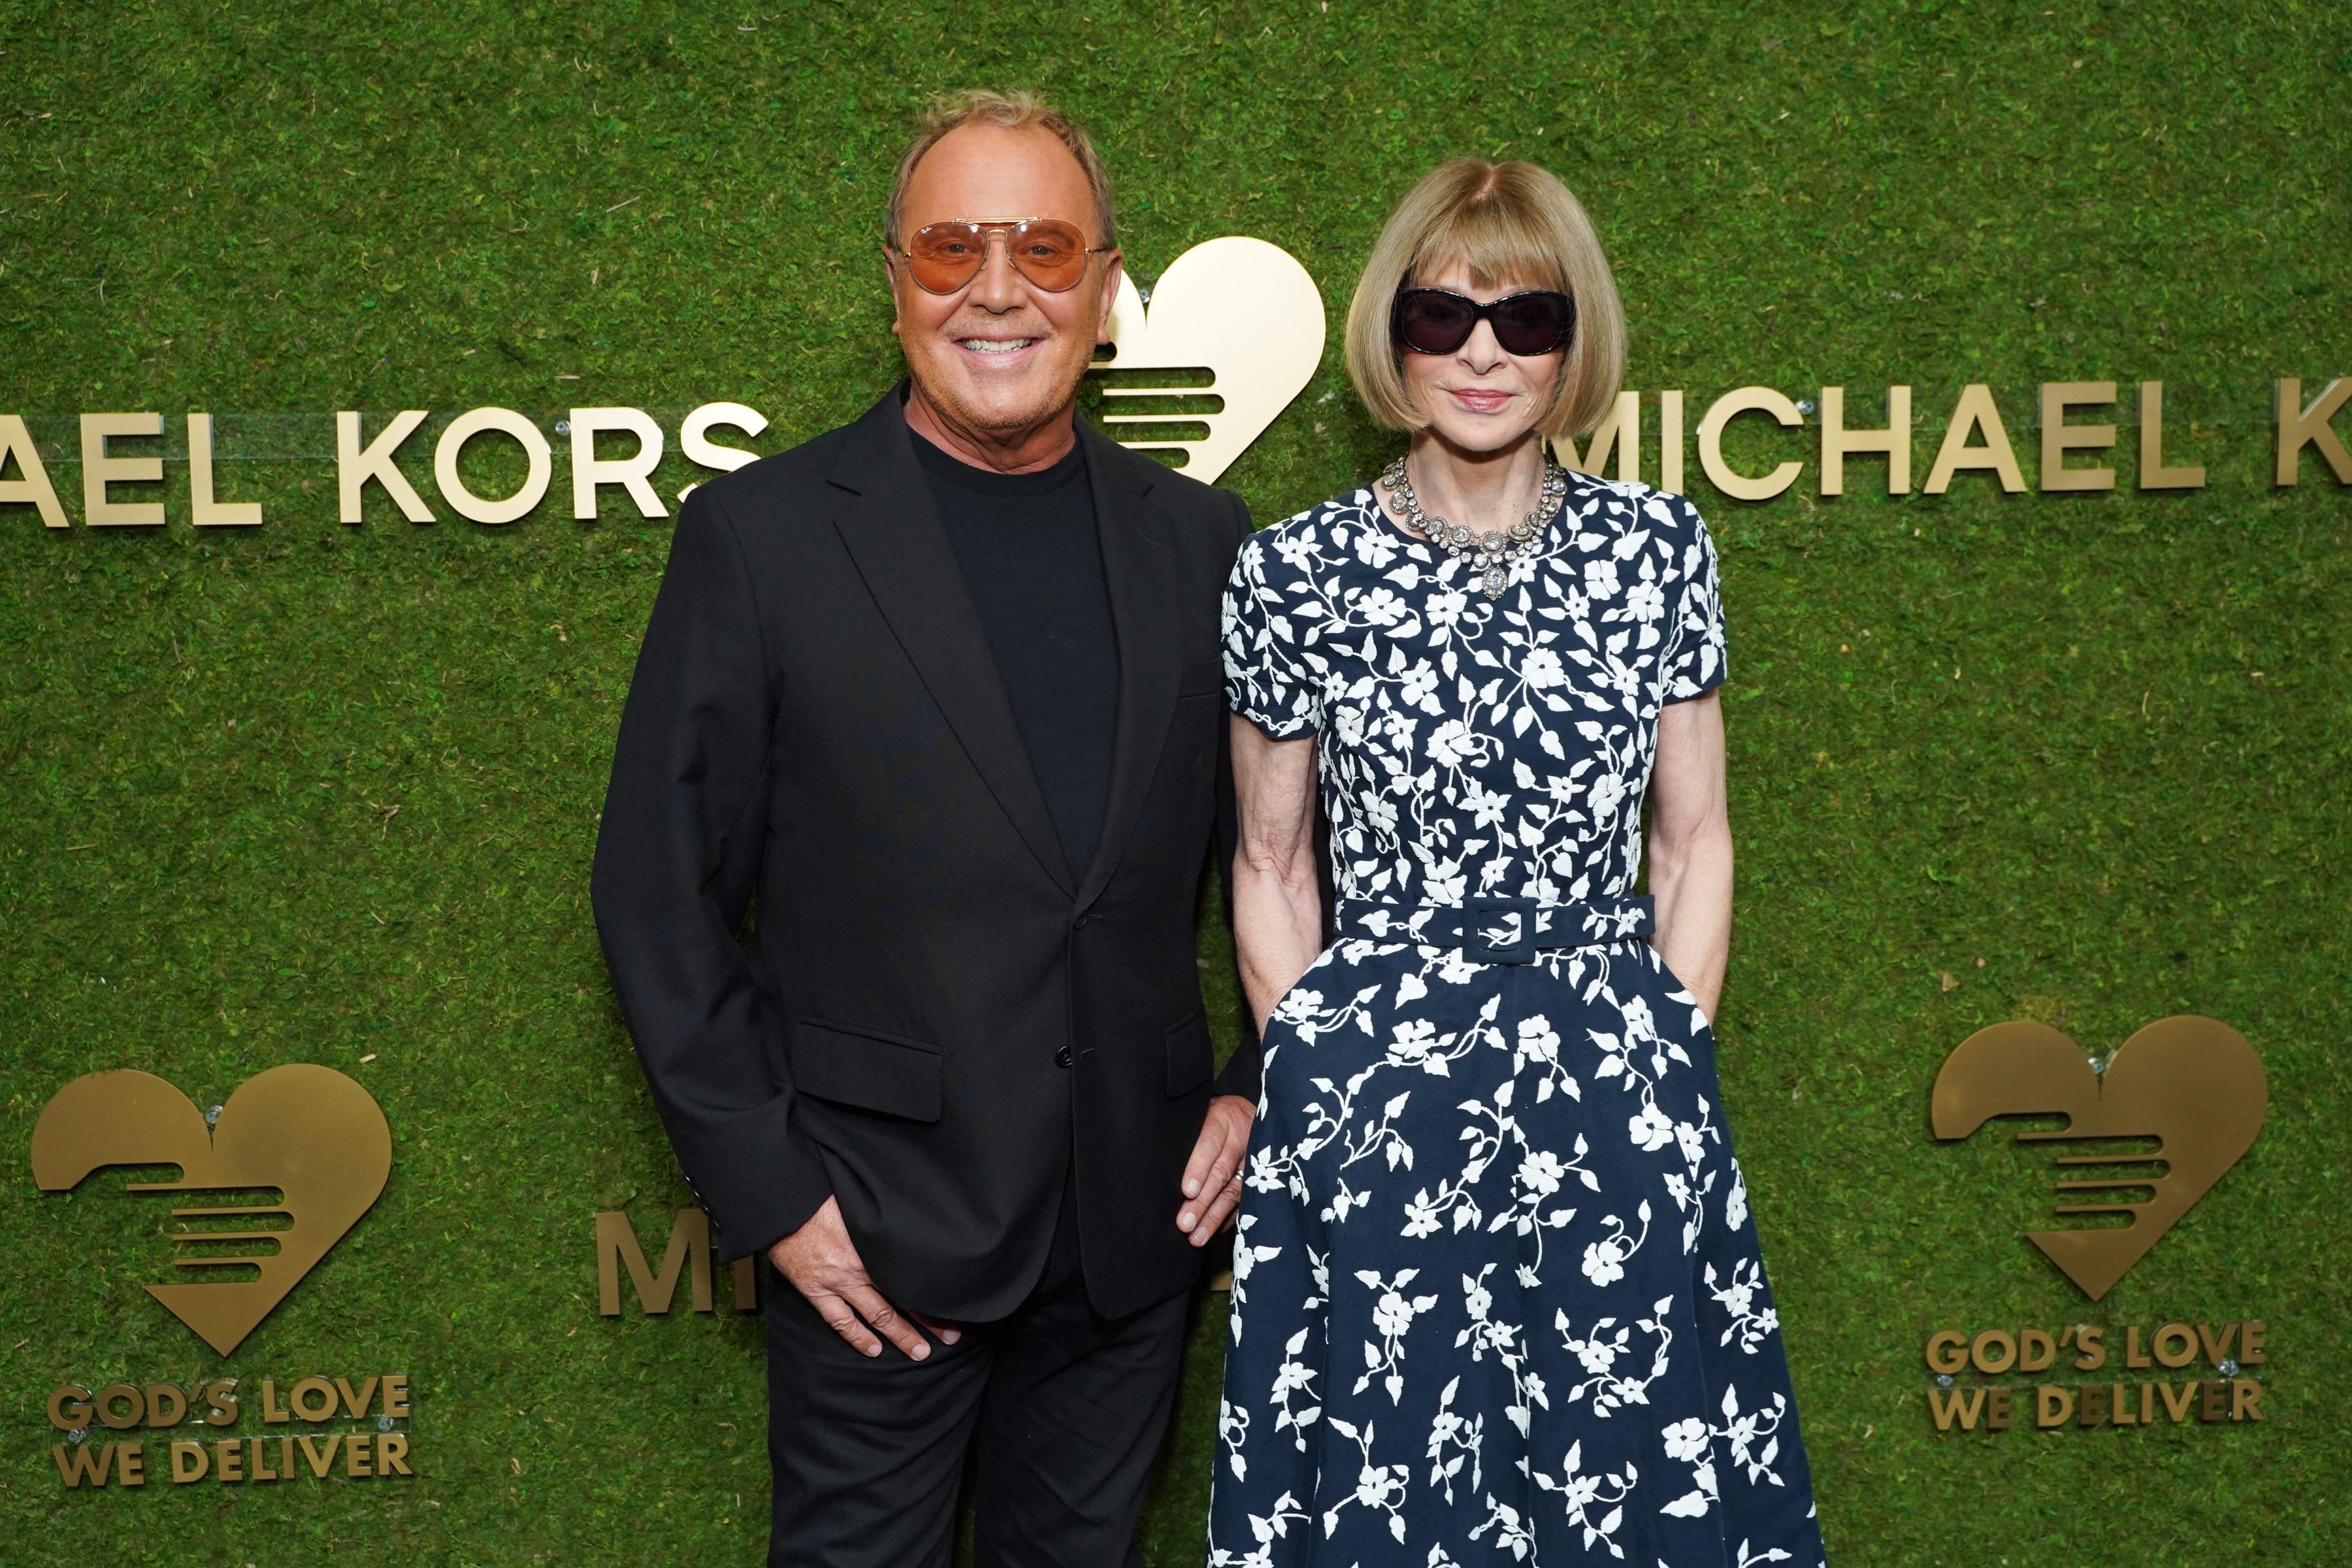 Michael Kors celebrated a night of giving back at God's Love We Deliver  15th Annual Golden Heart Awards Celebration - Grazia USA